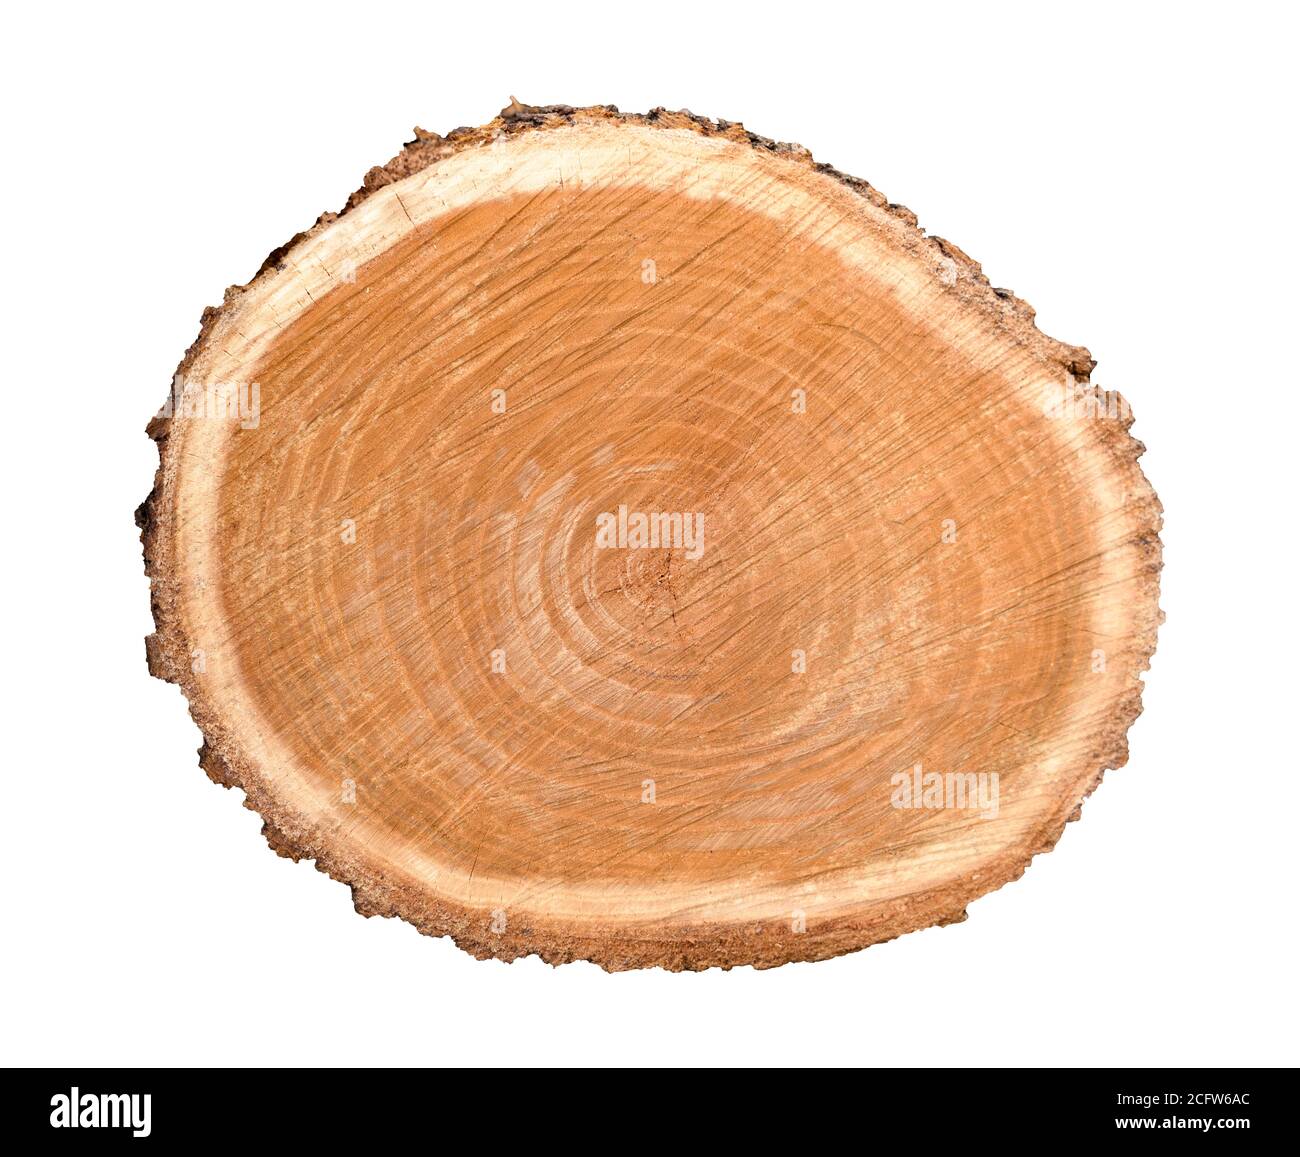 Tree Rings Reveal How Ancient Forests Were Managed - EcoWatch